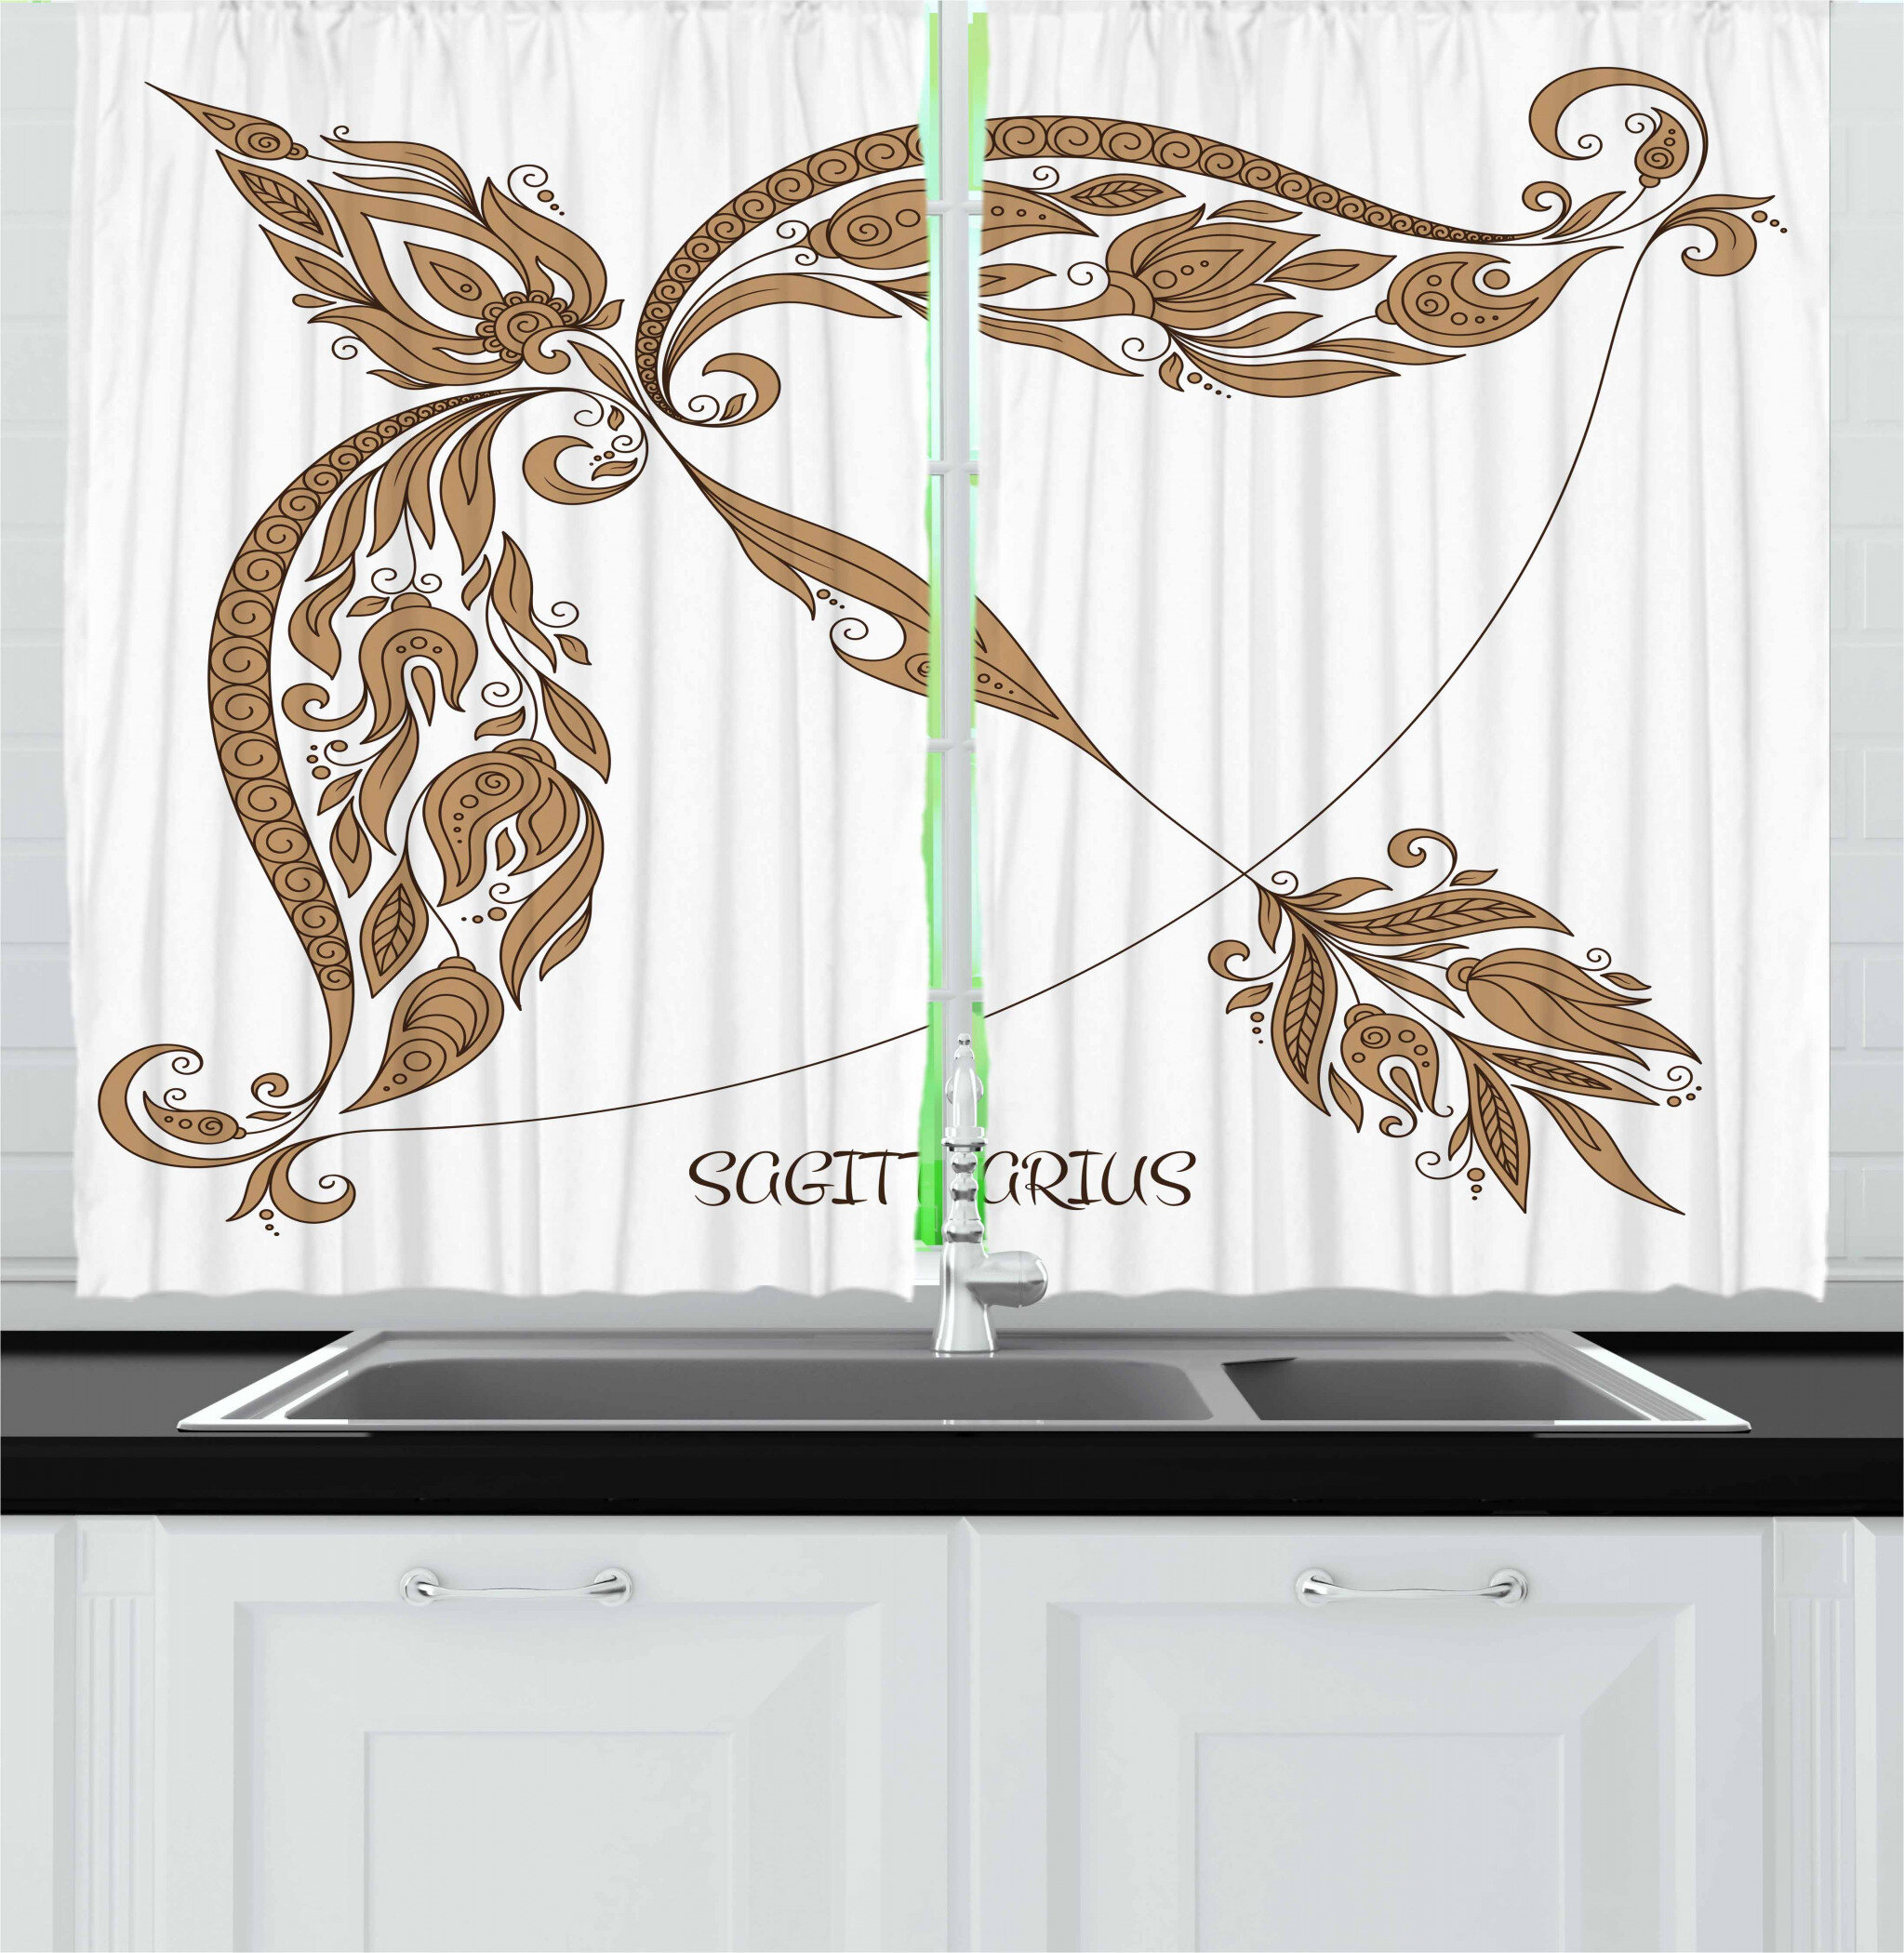 55 X 39 Window Drapes 2 Panel Set for Kitchen Cafe Decor Gothic Medieval Heraldic Ornamental Background Middle Age Knight Aged Artwork Print Ambesonne Fractal Kitchen Curtains Pink Brown